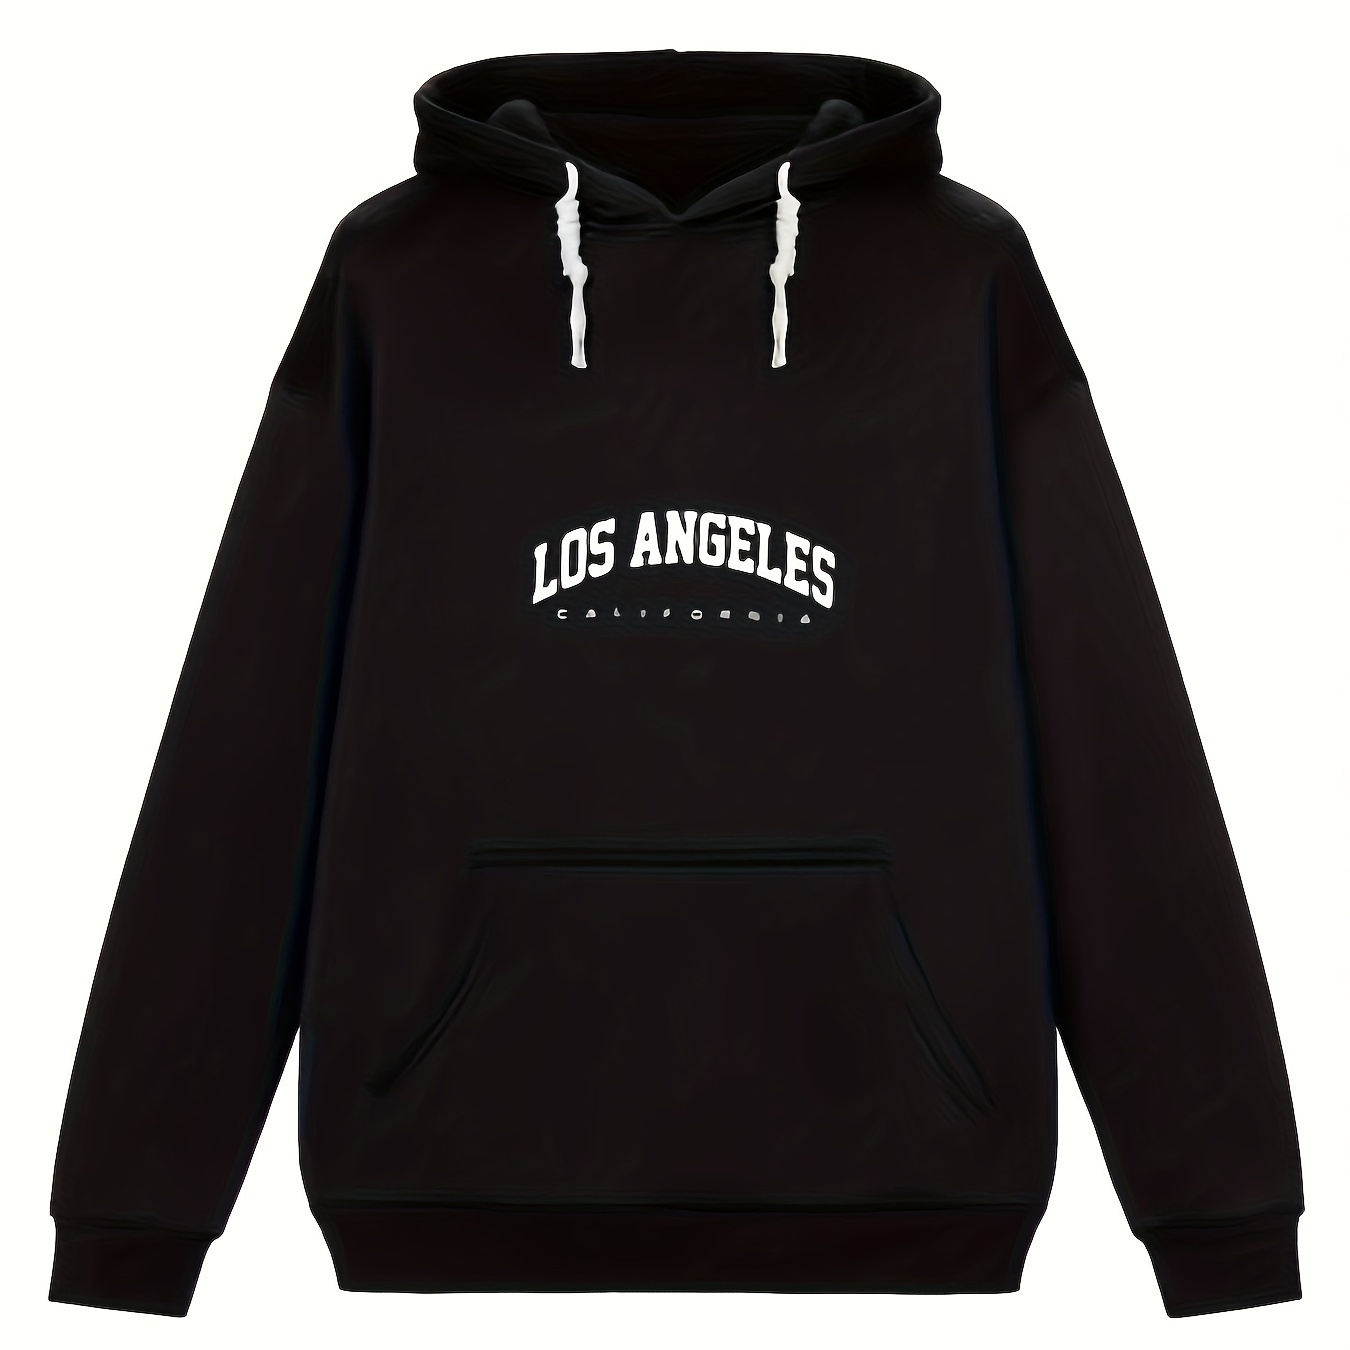 

Los Angeles Print Hoodies For Men, Graphic Hoodie With Kangaroo Pocket, Comfy Loose Trendy Hooded Pullover, Mens Clothing For Autumn Winter